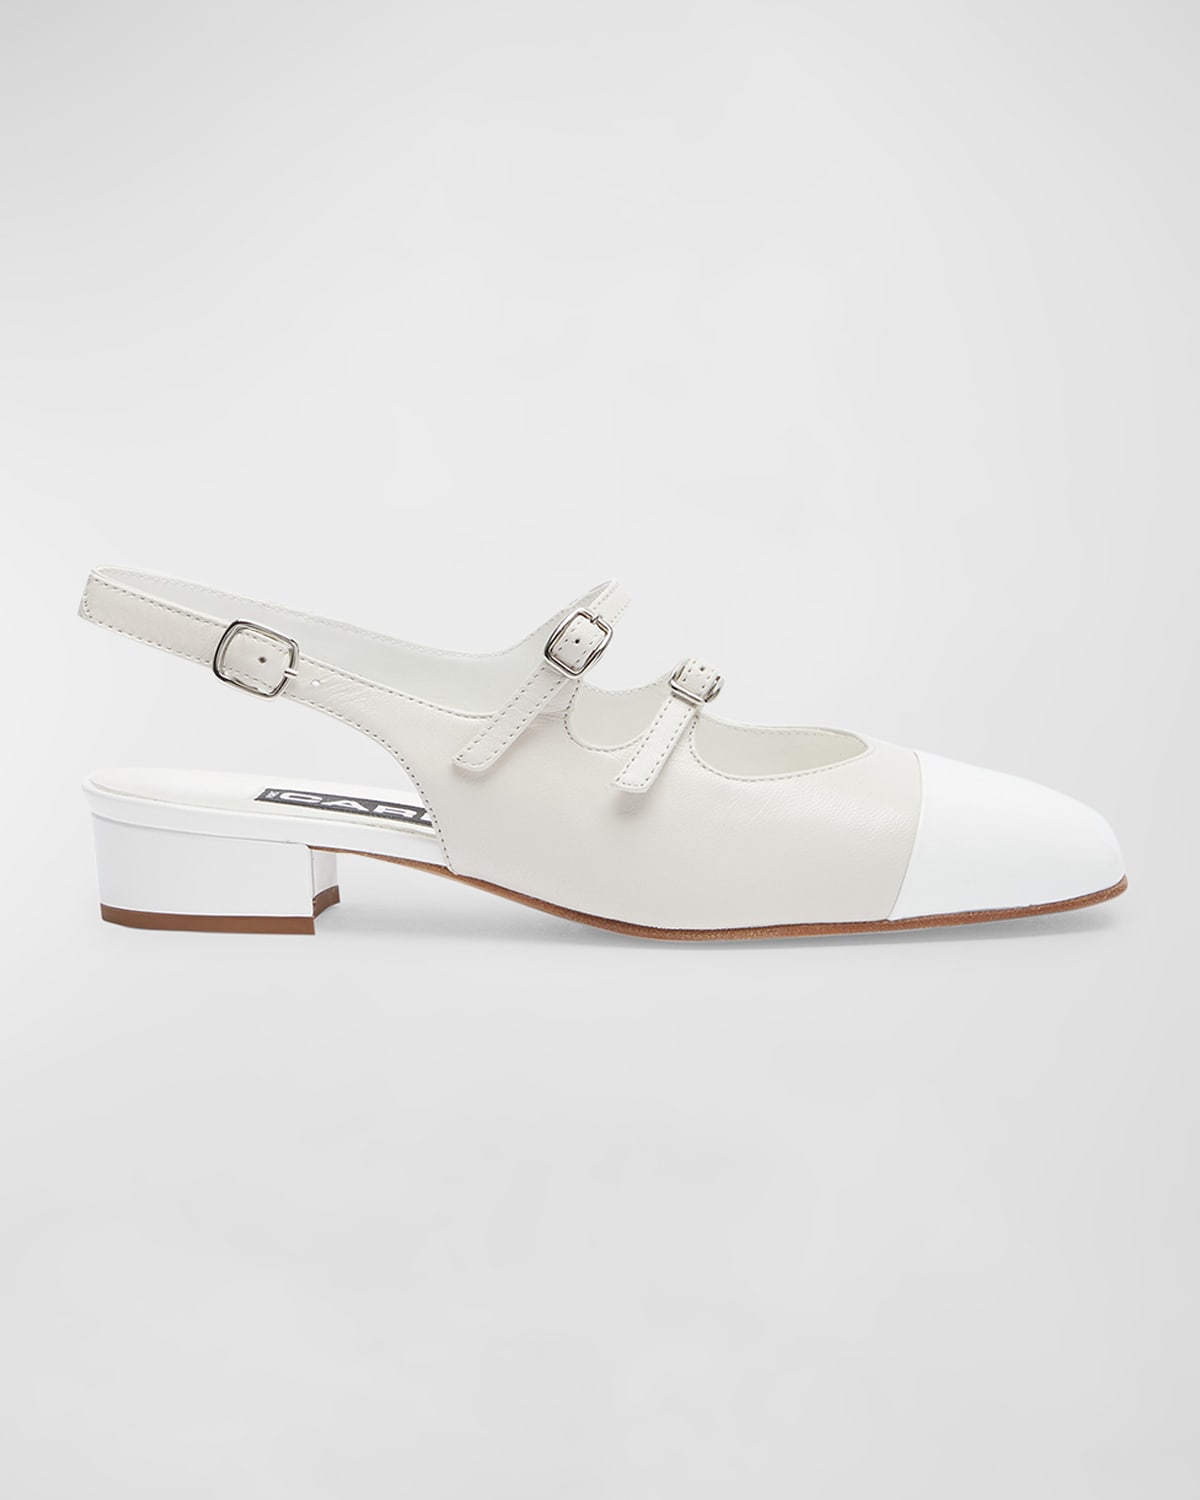 Carel Abricot Mixed Leather Mary Jane Slingback Flats In Beige White